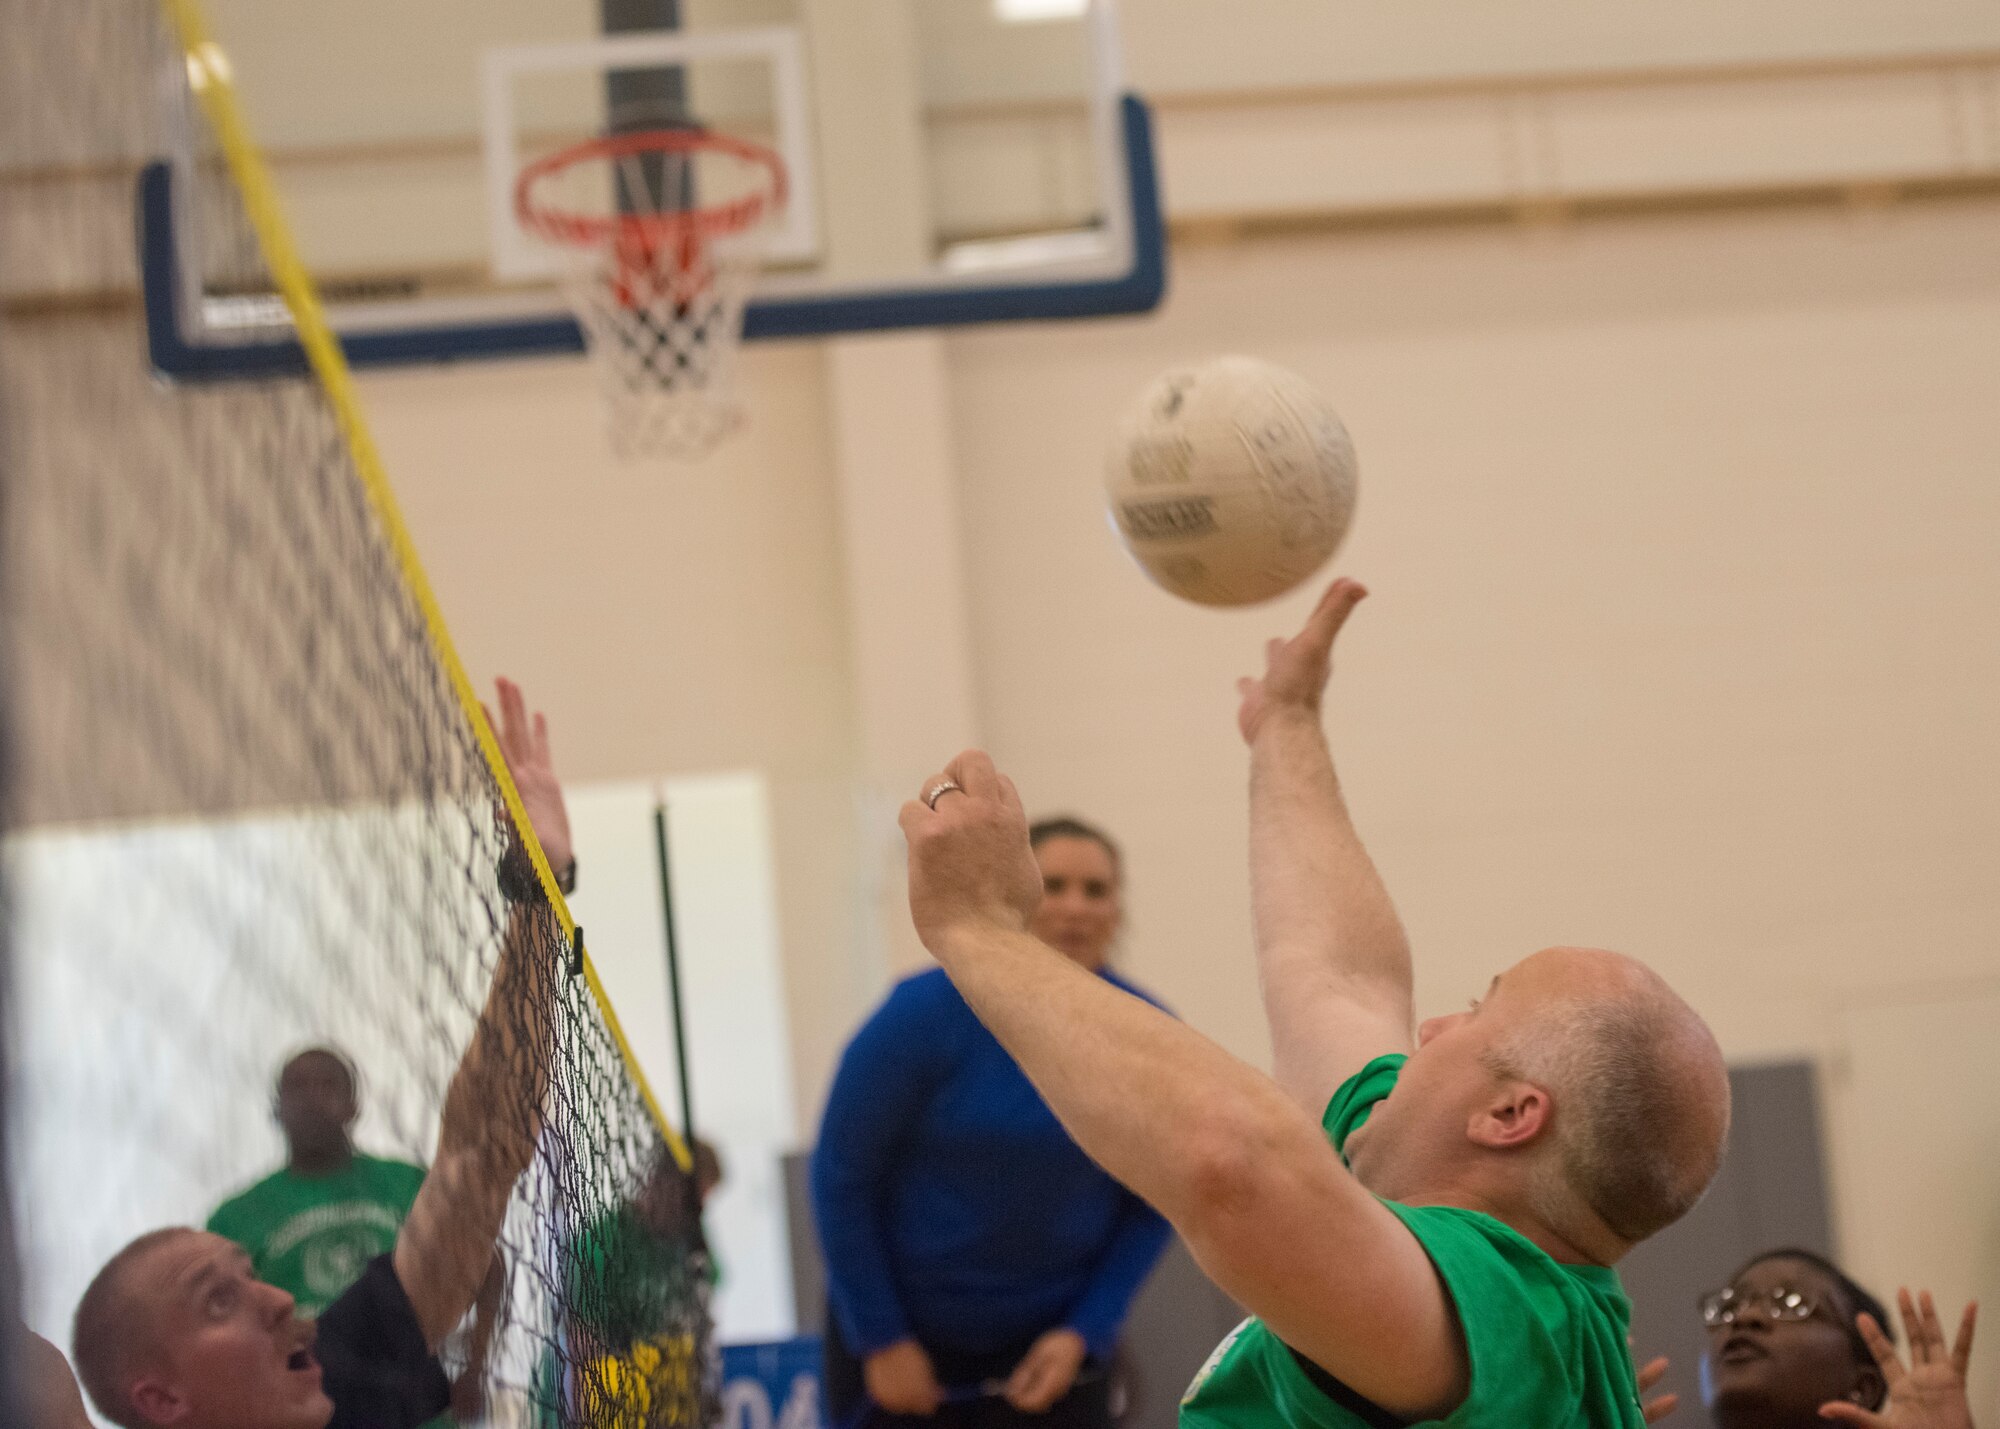 A group of Airmen prepare to hit the ball during sit-down volleyball June 14, 2019 at Dover Air Force Base, Del. The sit-down volleyball event was to recognize wounded warriors through sports and fitness and to involve a larger team for squadron participation. (U.S. Air Force photo by A1C Jonathan Harding)